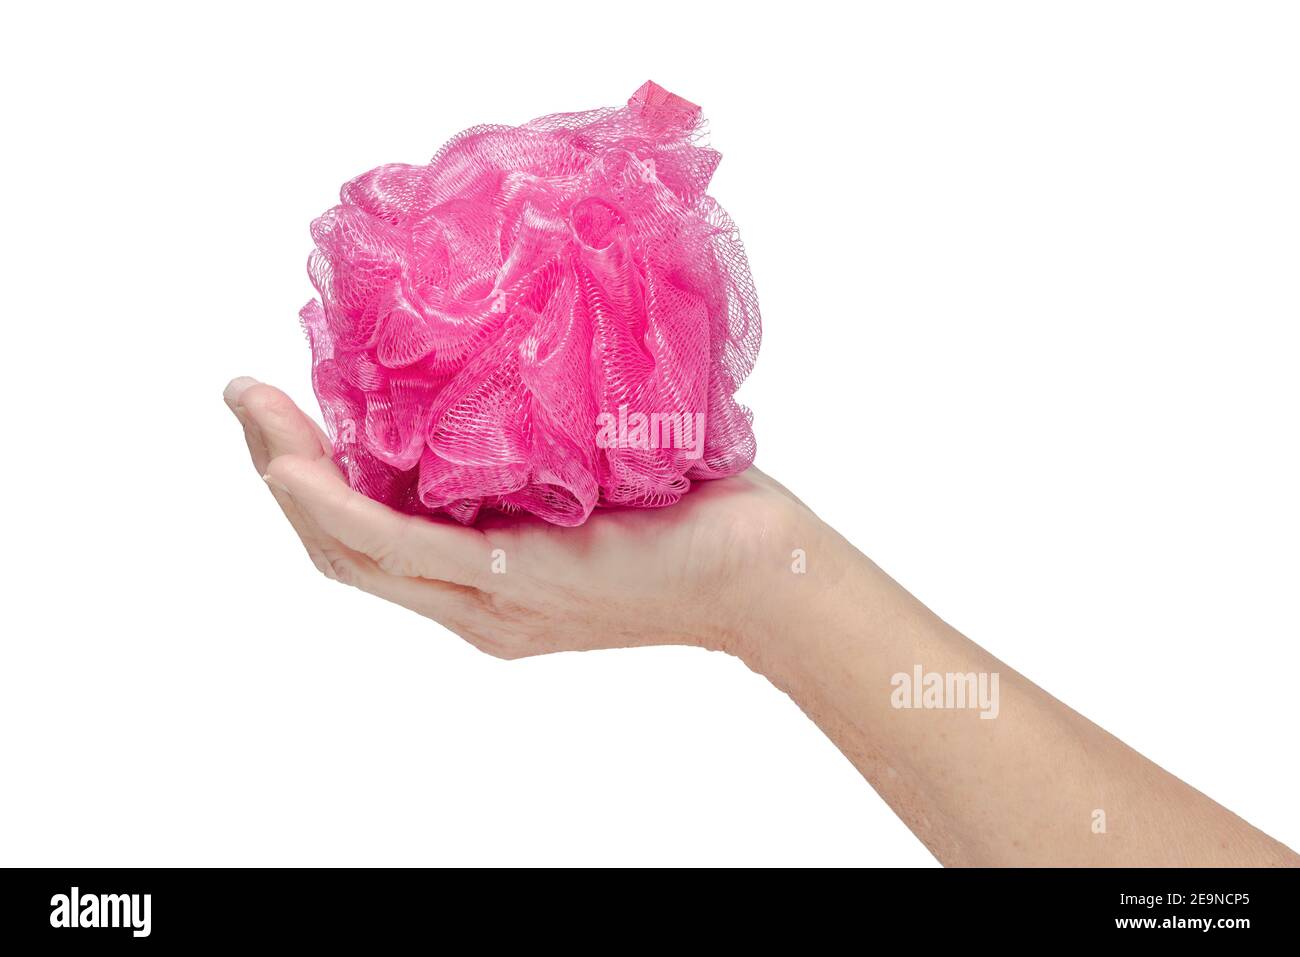 Horizontal side shot of a pink bath loofah or scrunchie in a woman’s hand on a white background. Stock Photo